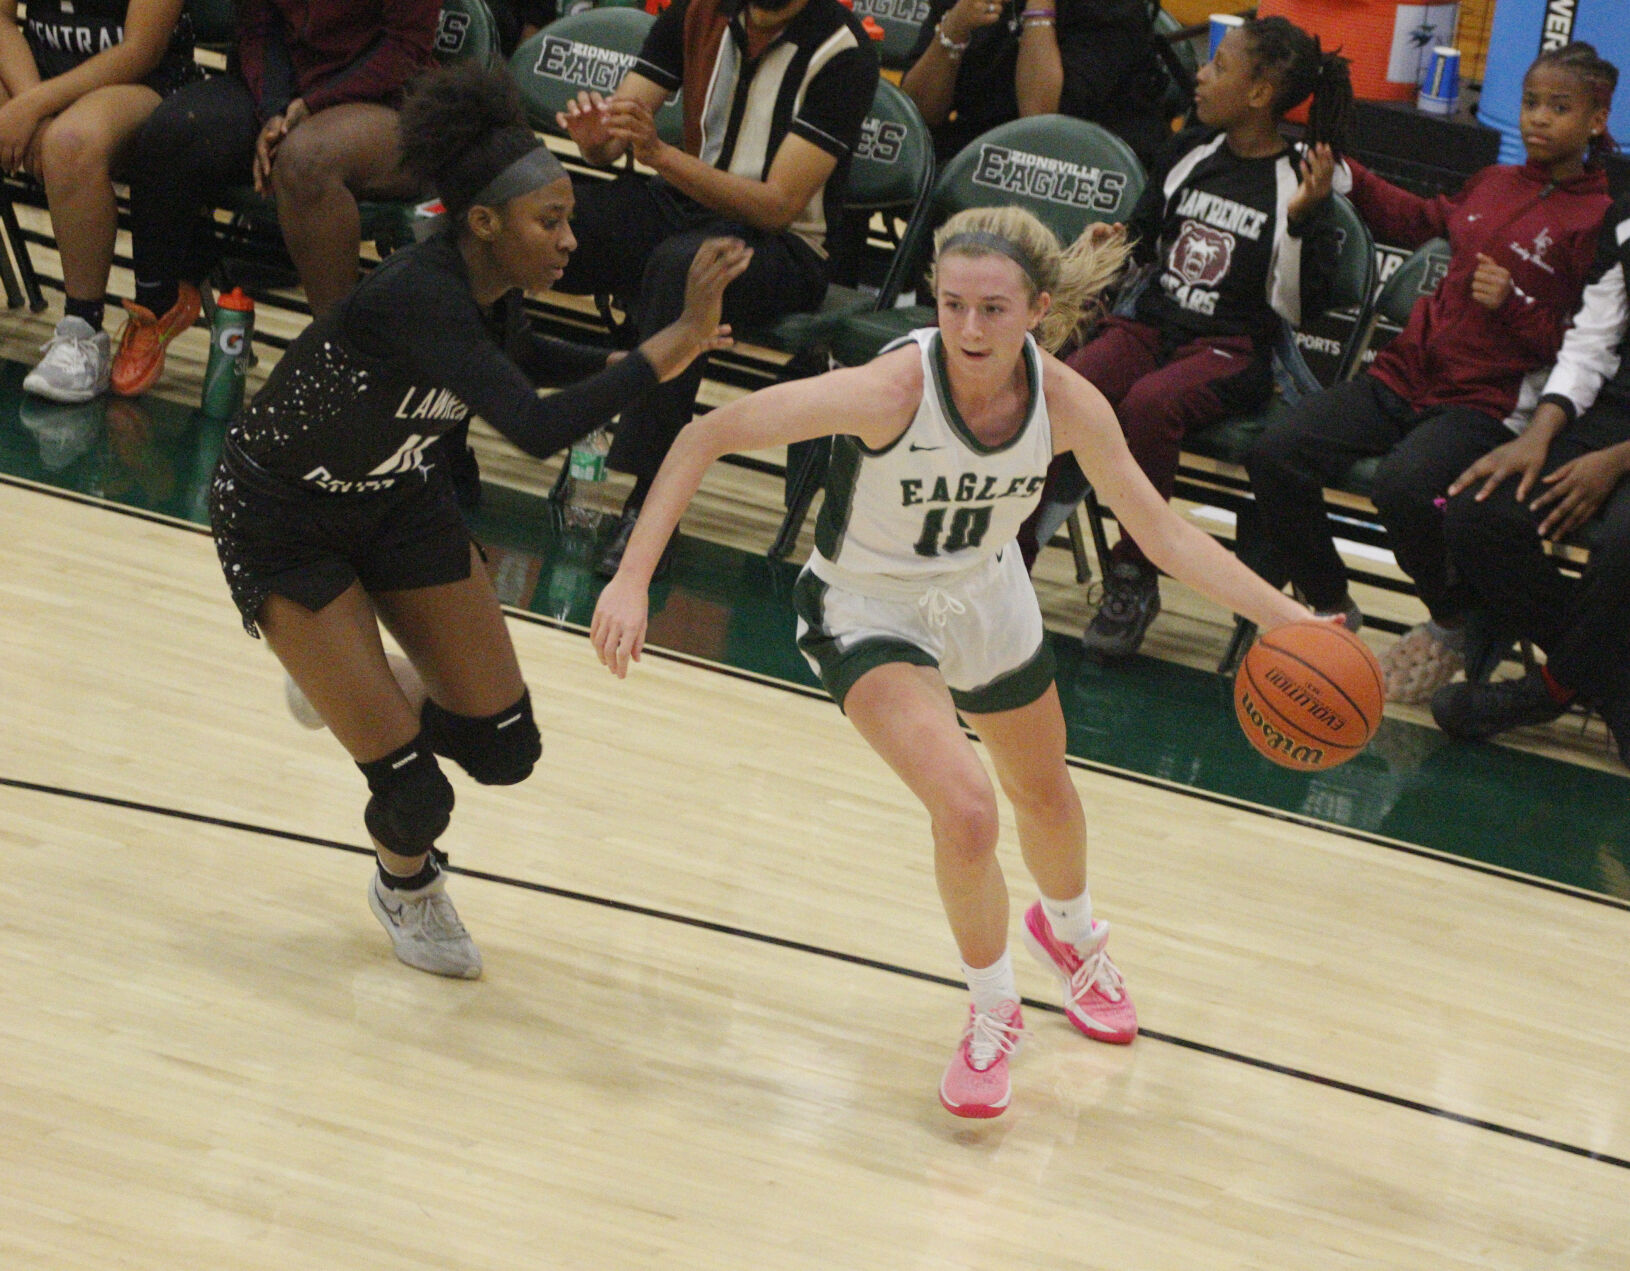 Zionsville girls basketball team falls behind in the first quarter, but valiant comeback falls short against Lawrence Central